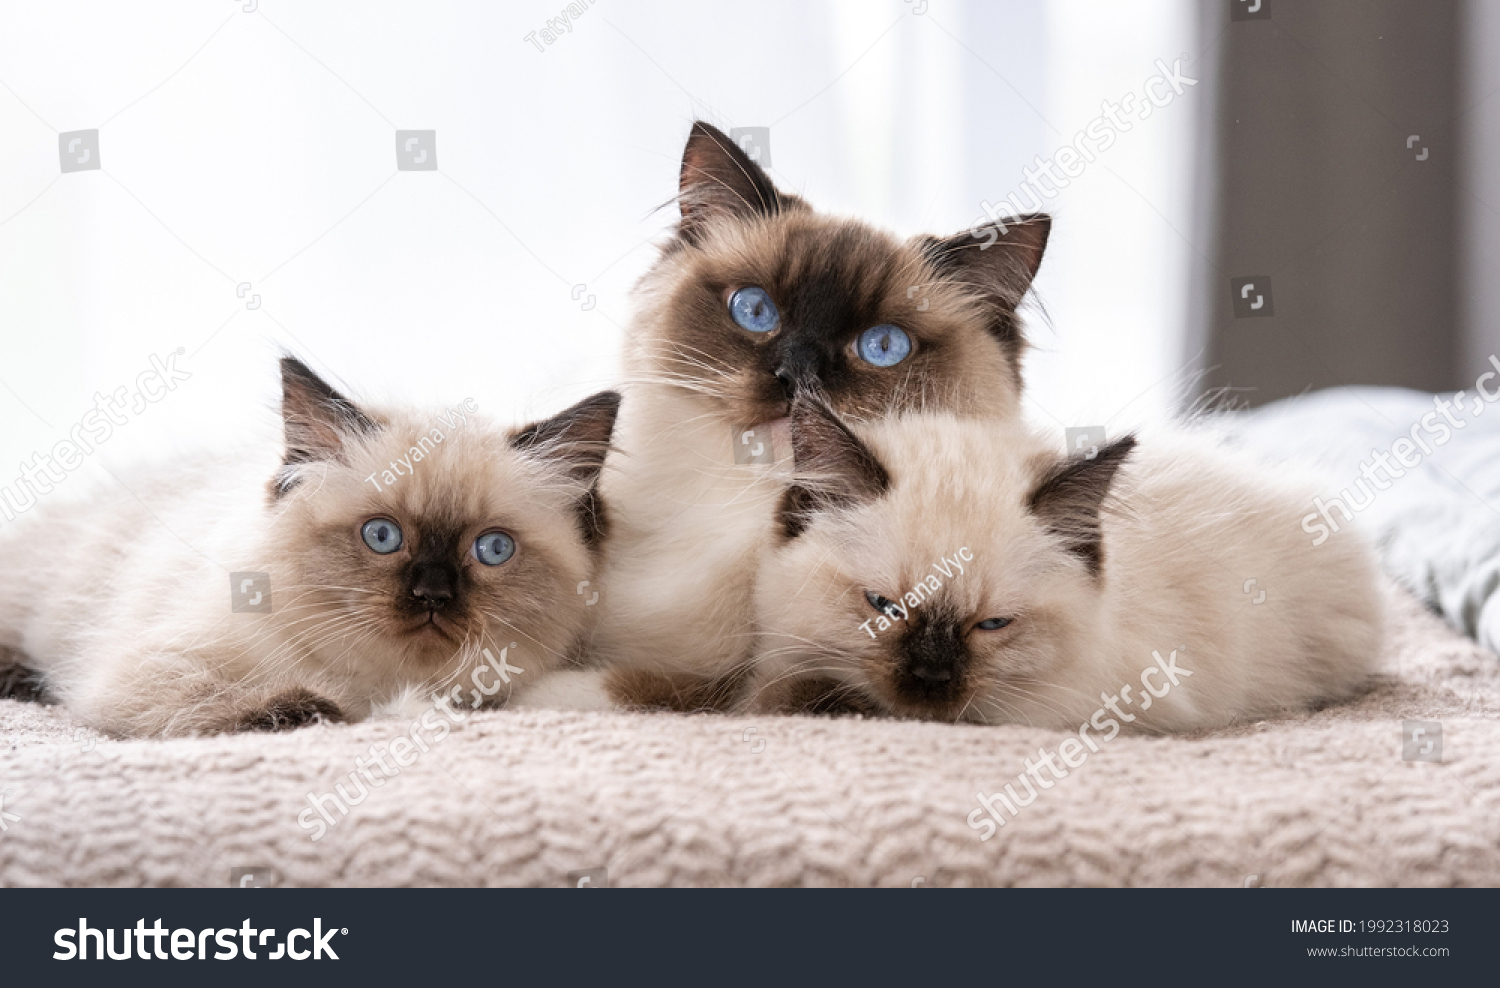 Adorable ragdoll cat with beautiful blue eyes lying in the bed with two sleeping kittens. Feline family at home. Mother pet and her kitty children together #1992318023